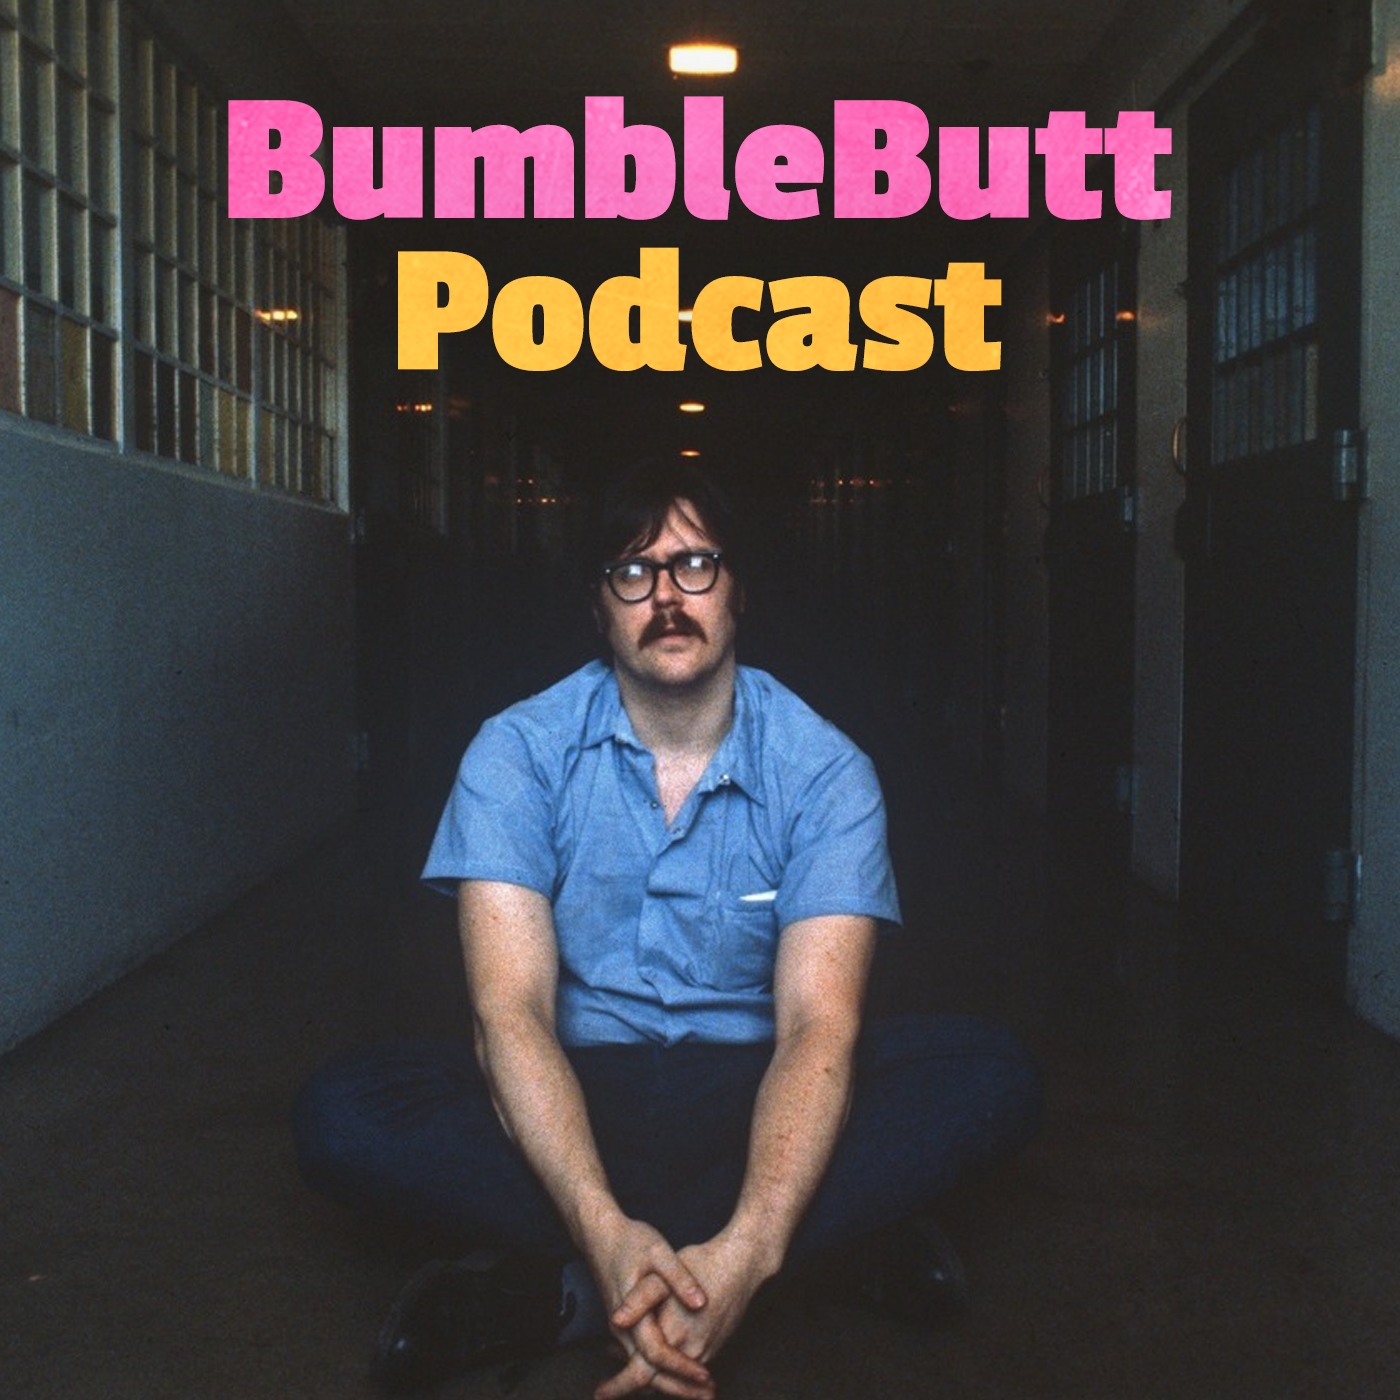 Bumblebutt Podcast: True Crime / Paranormal